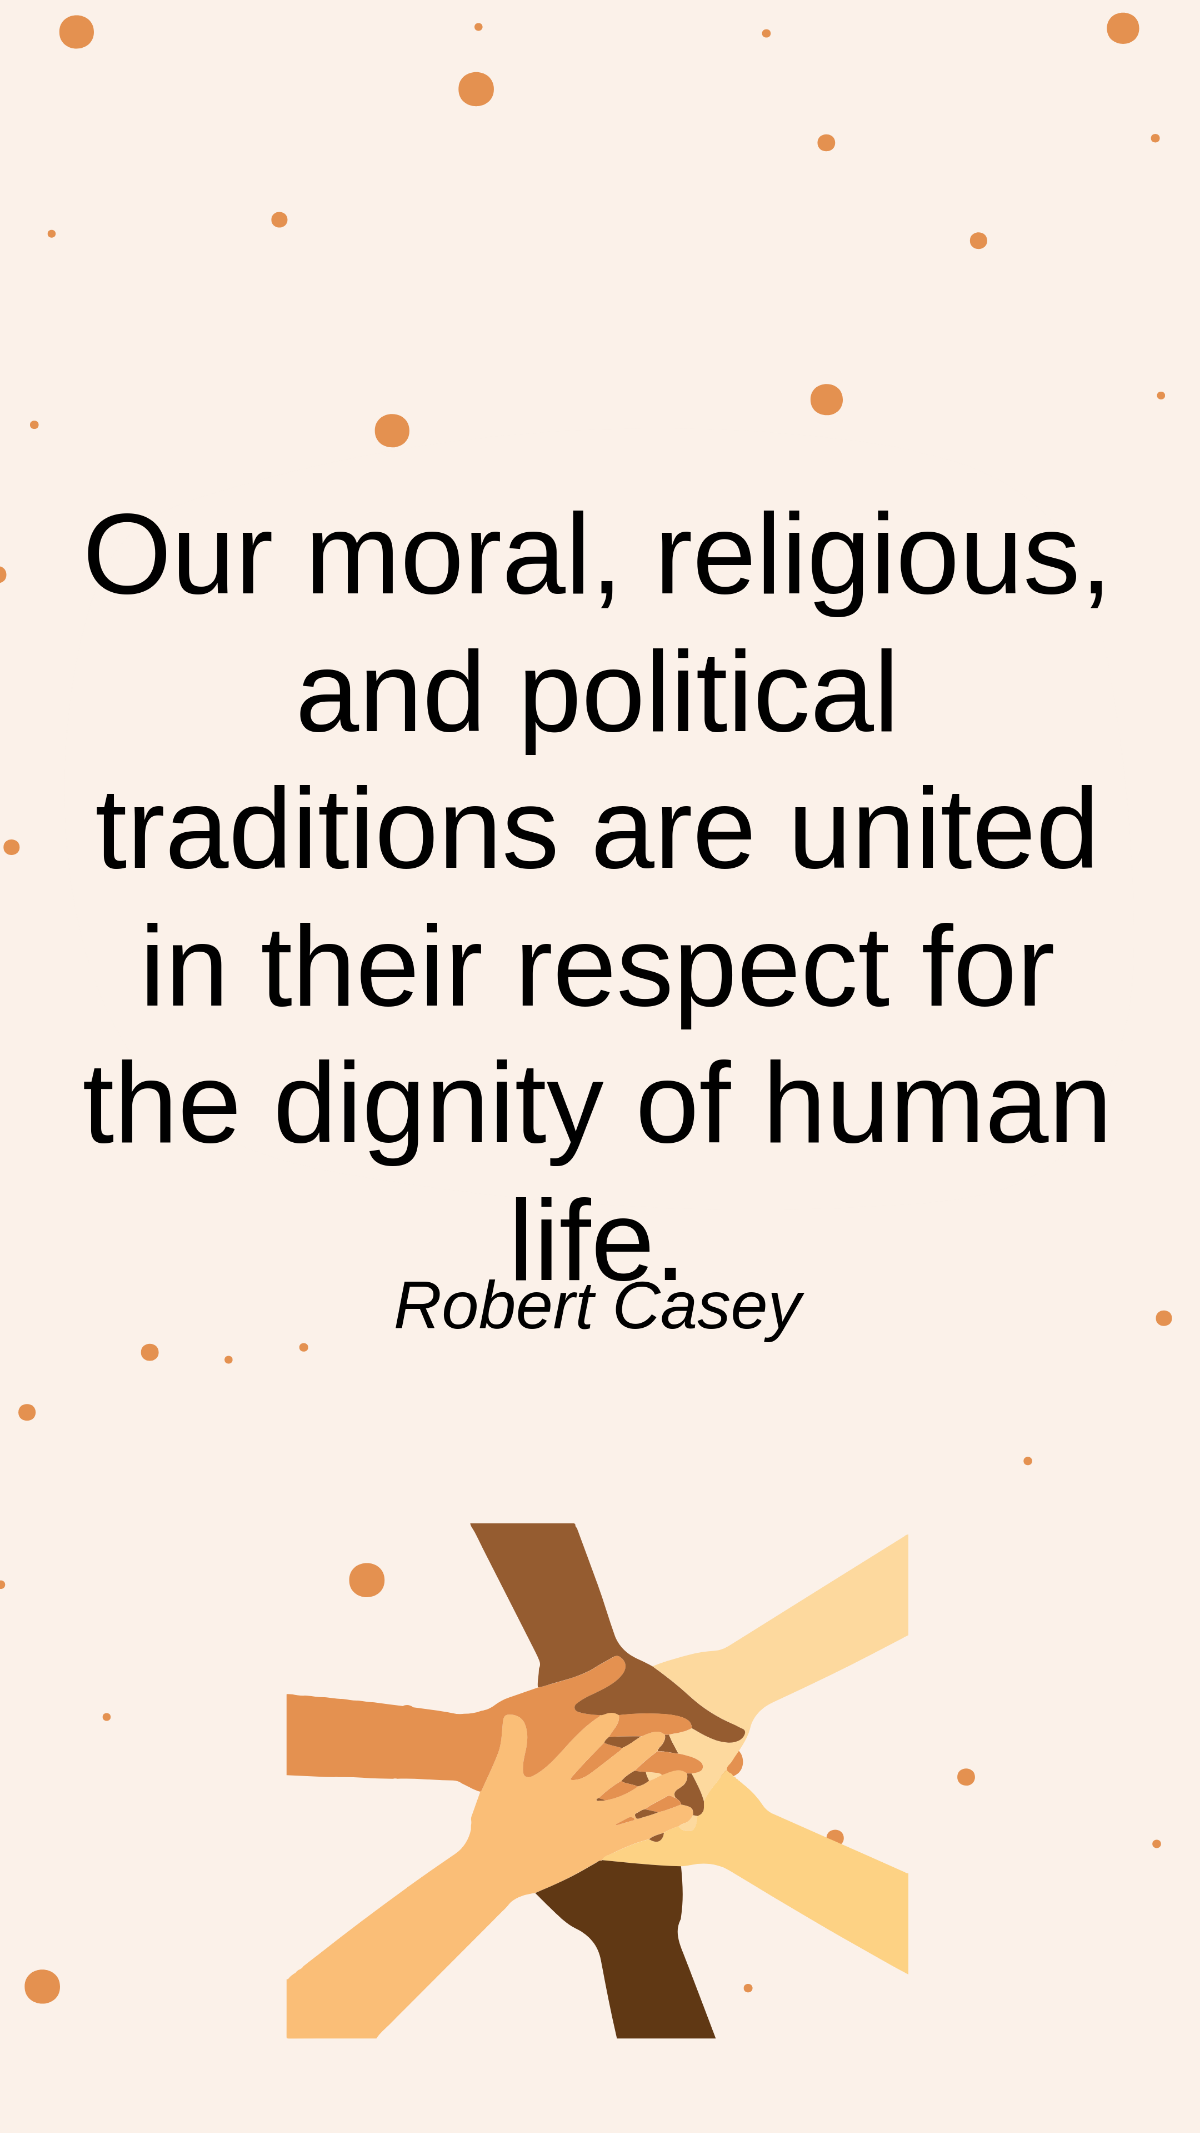 Robert Casey - Our moral, religious, and political traditions are united in their respect for the dignity of human life. Template